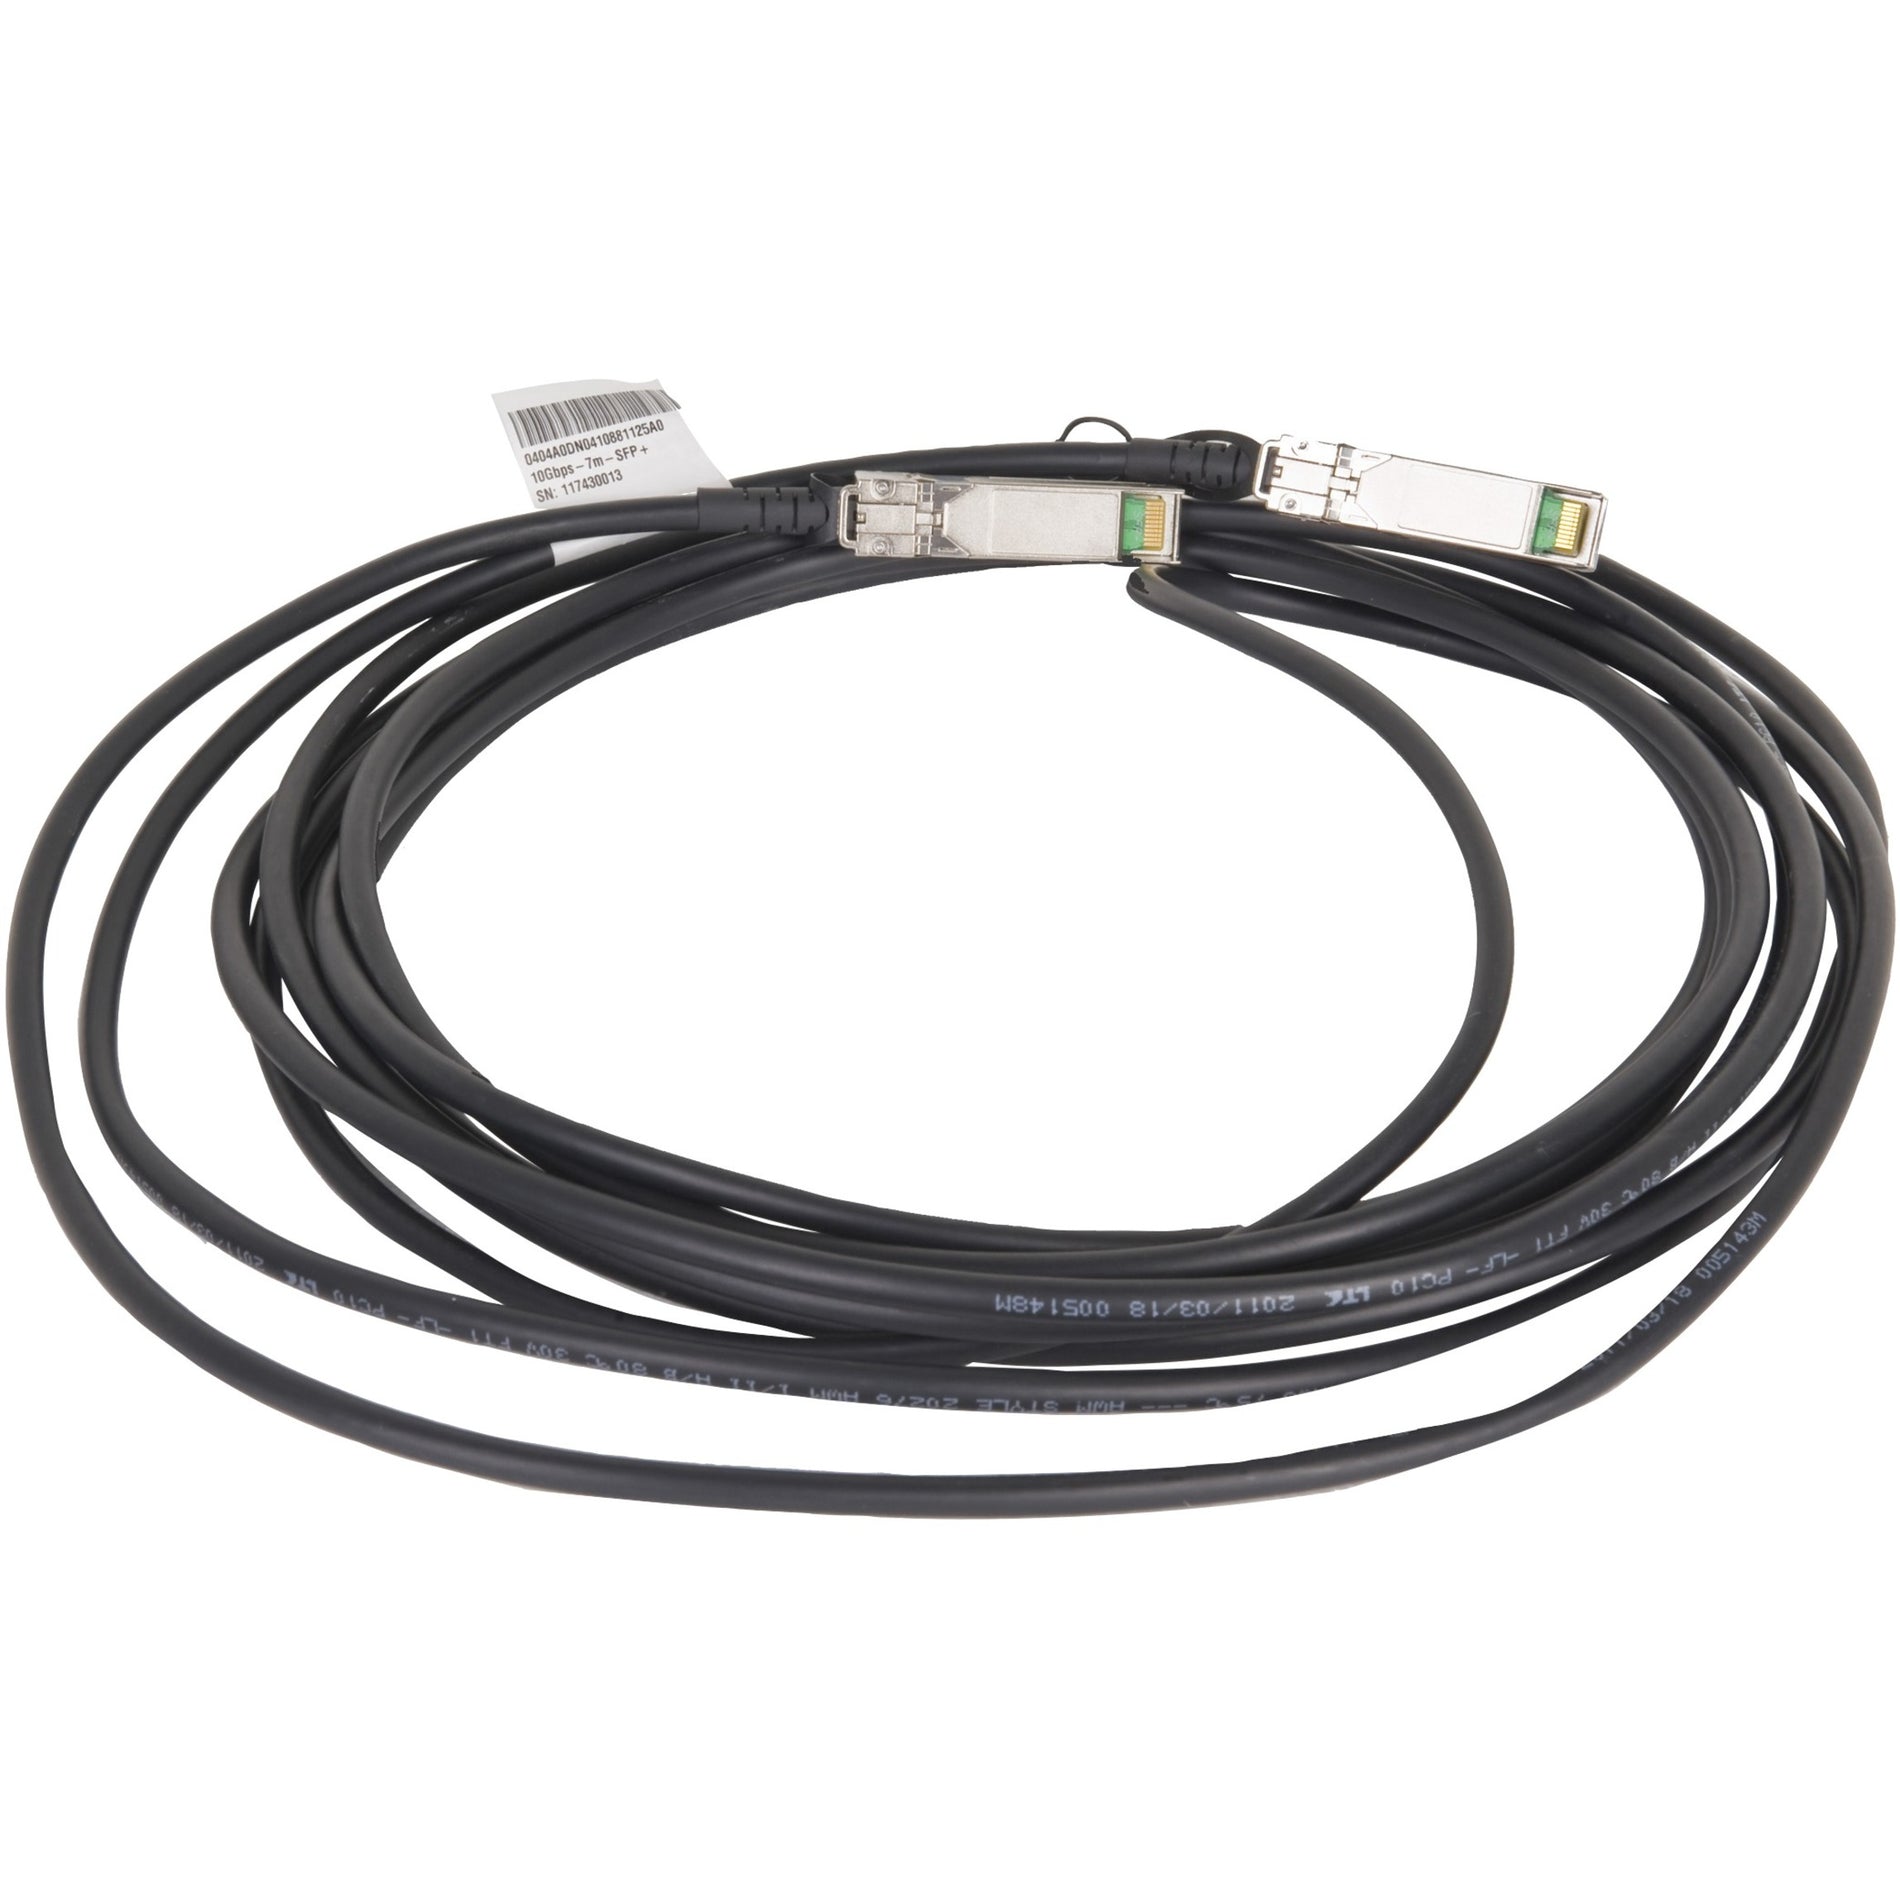 HPE 537963-B21 Network Cable, SFP+ to SFP+ - 16.4ft